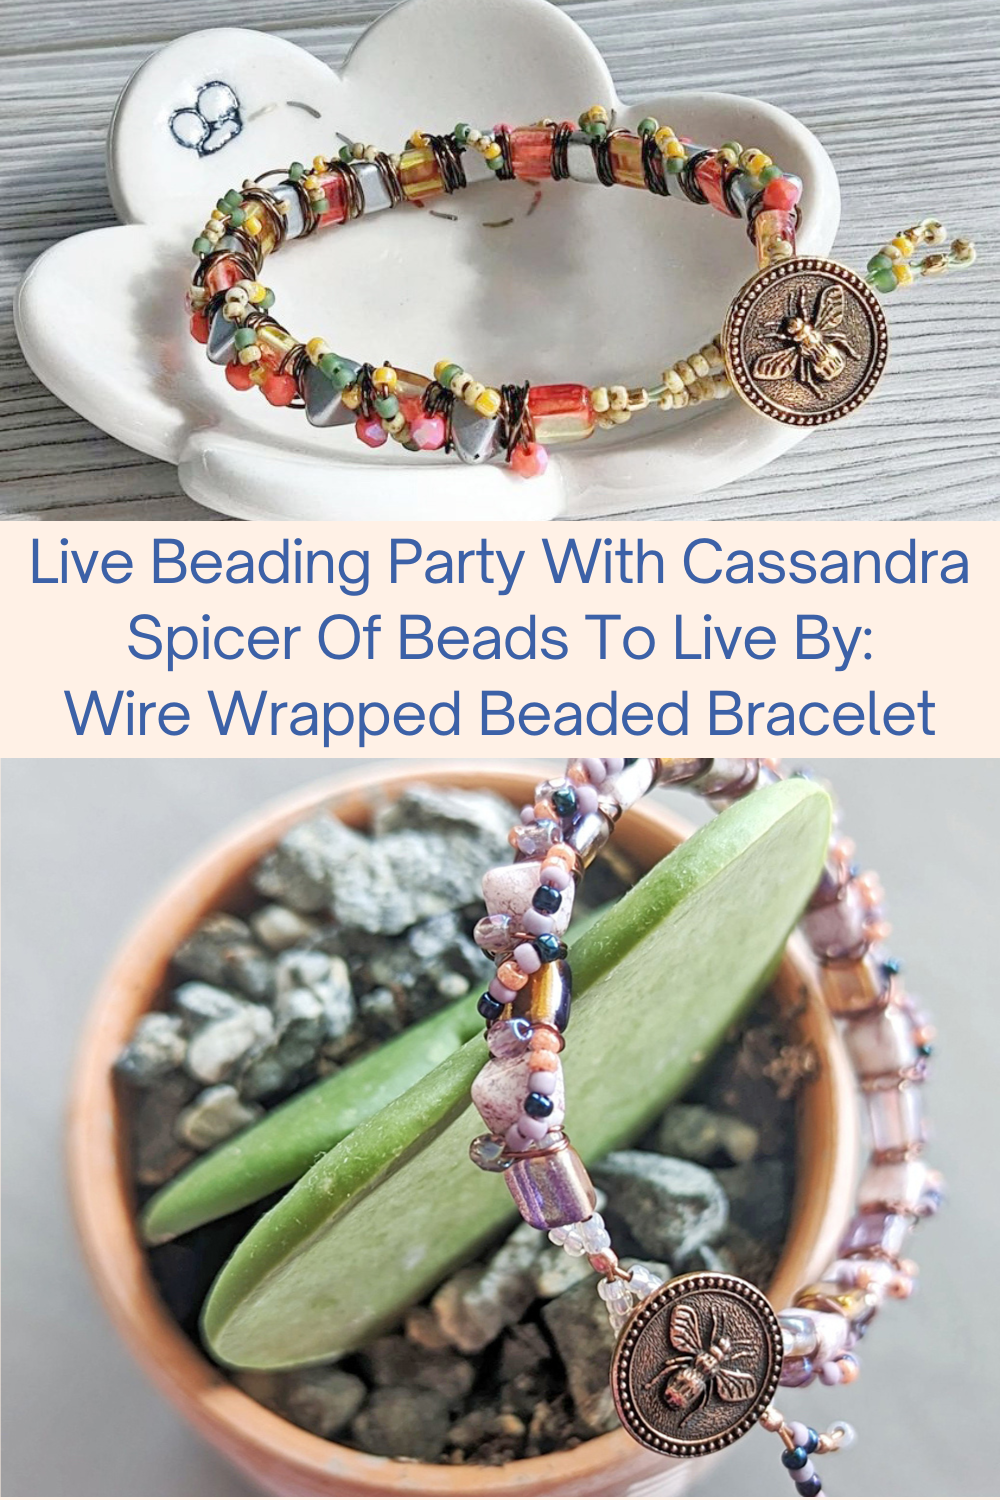 Live Beading Party With Cassandra Spicer Of Beads To Live By Wire Wrapped Beaded Bracelet Collage